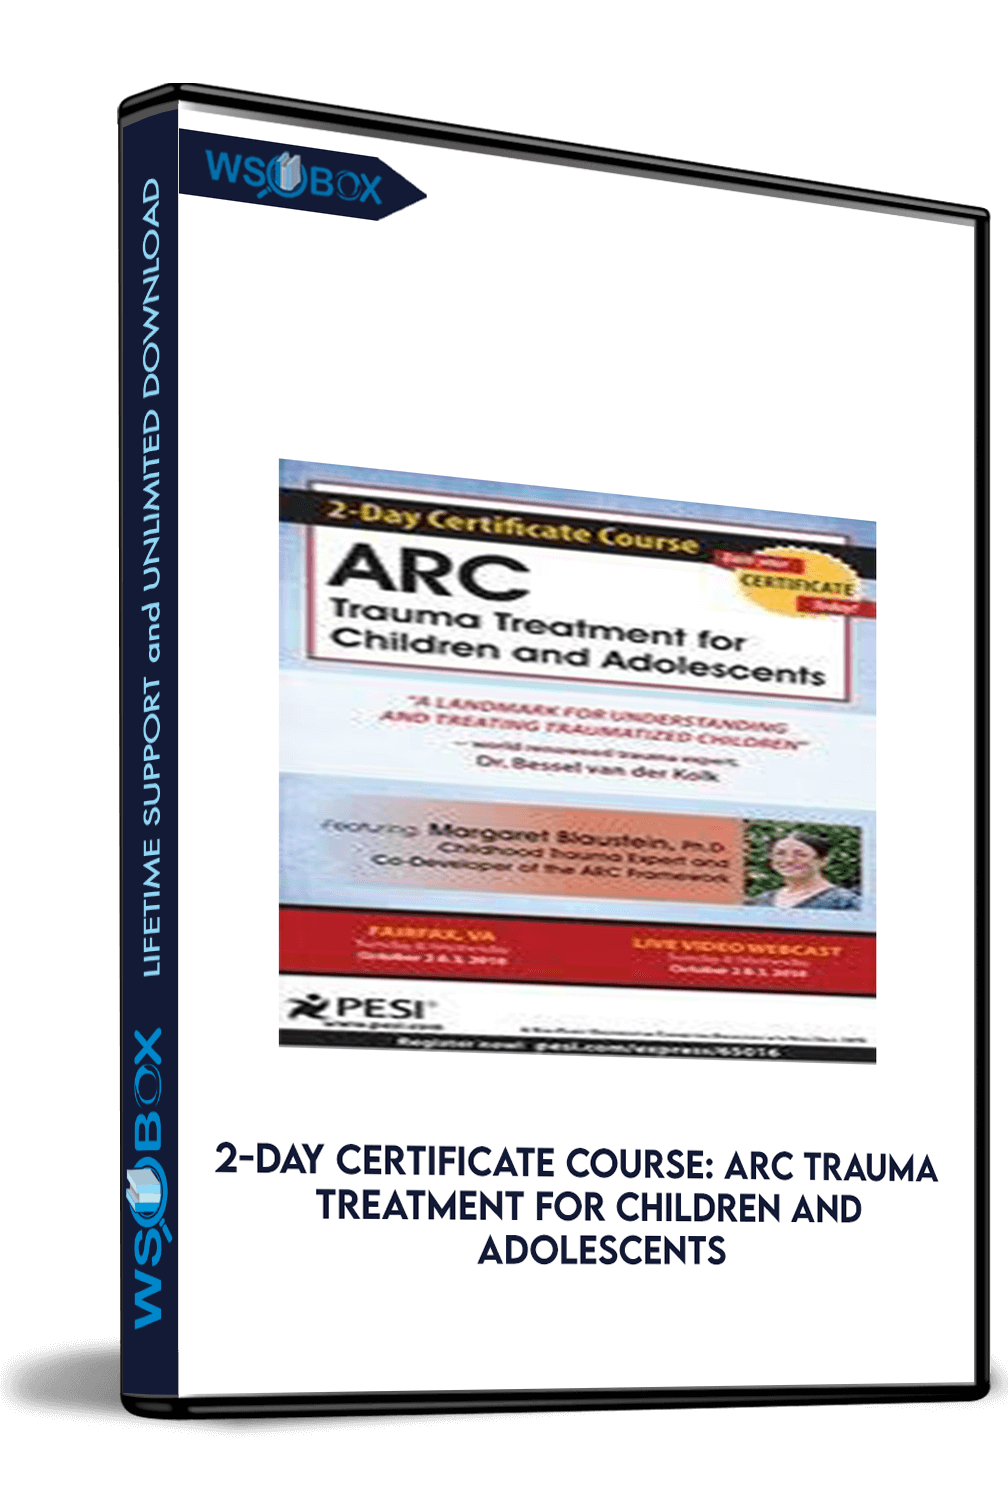 2-day-certificate-course-arc-trauma-treatment-for-children-and-adolescents